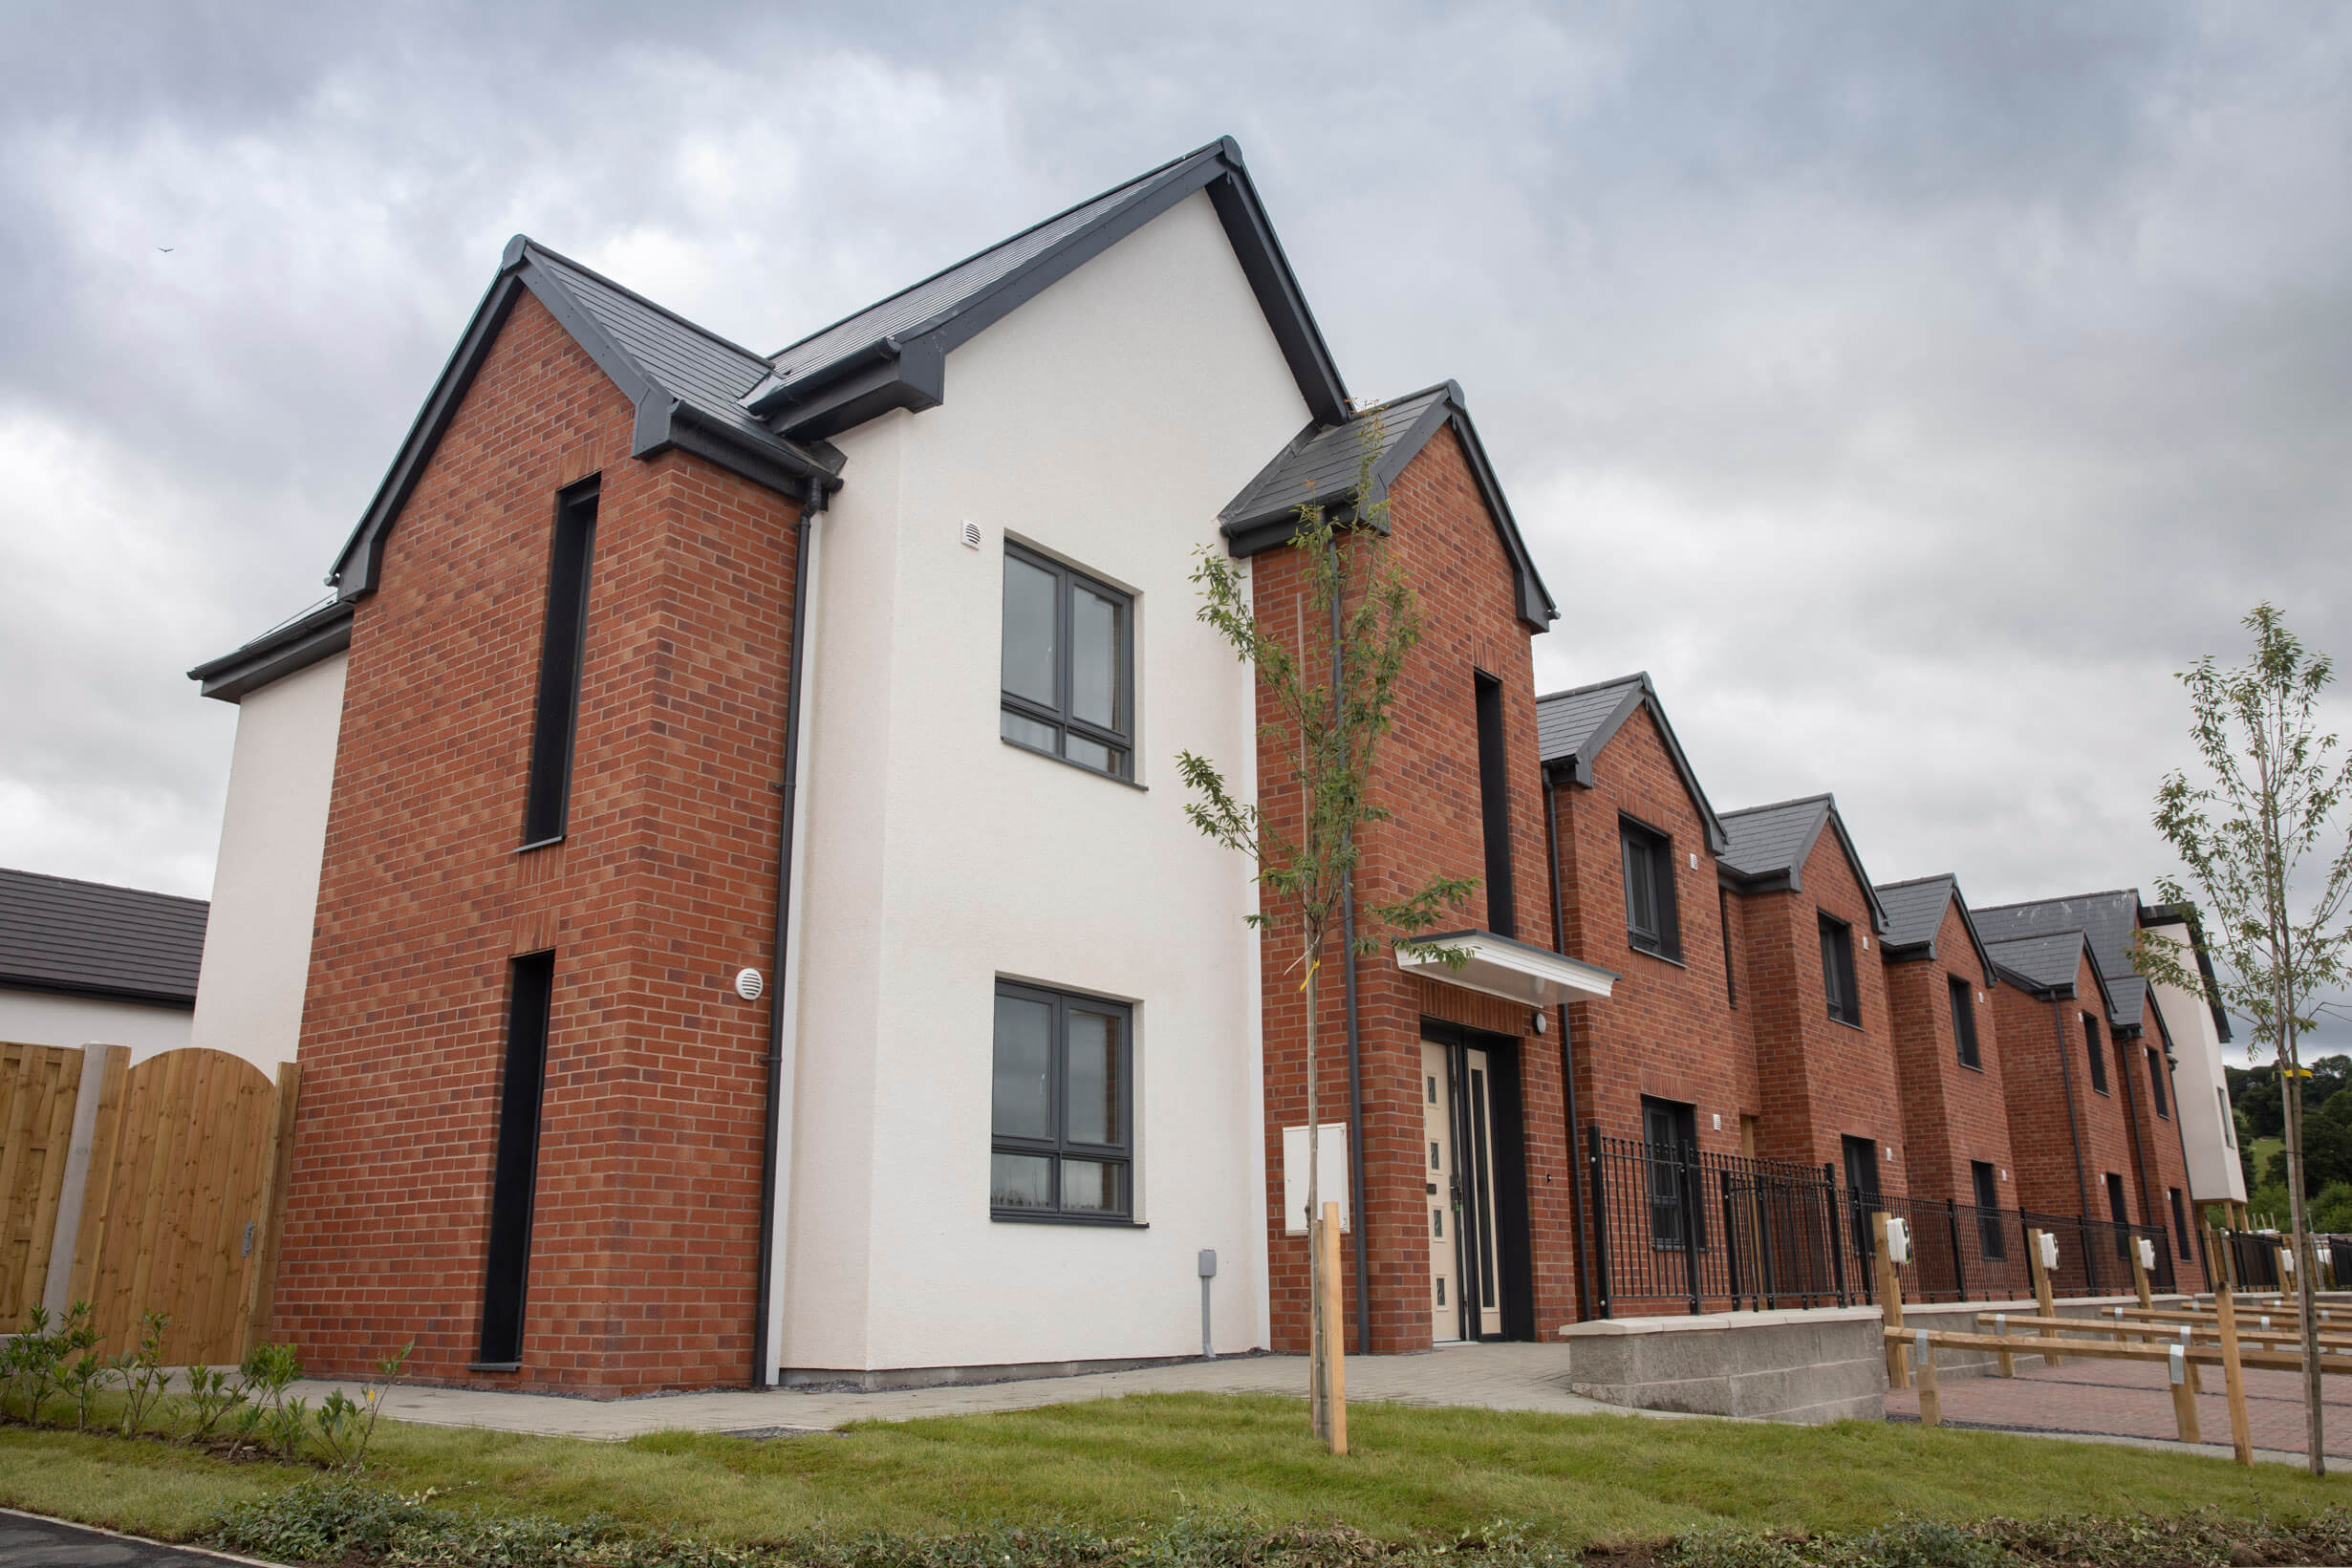 Minister visits new housing development in Ruthin